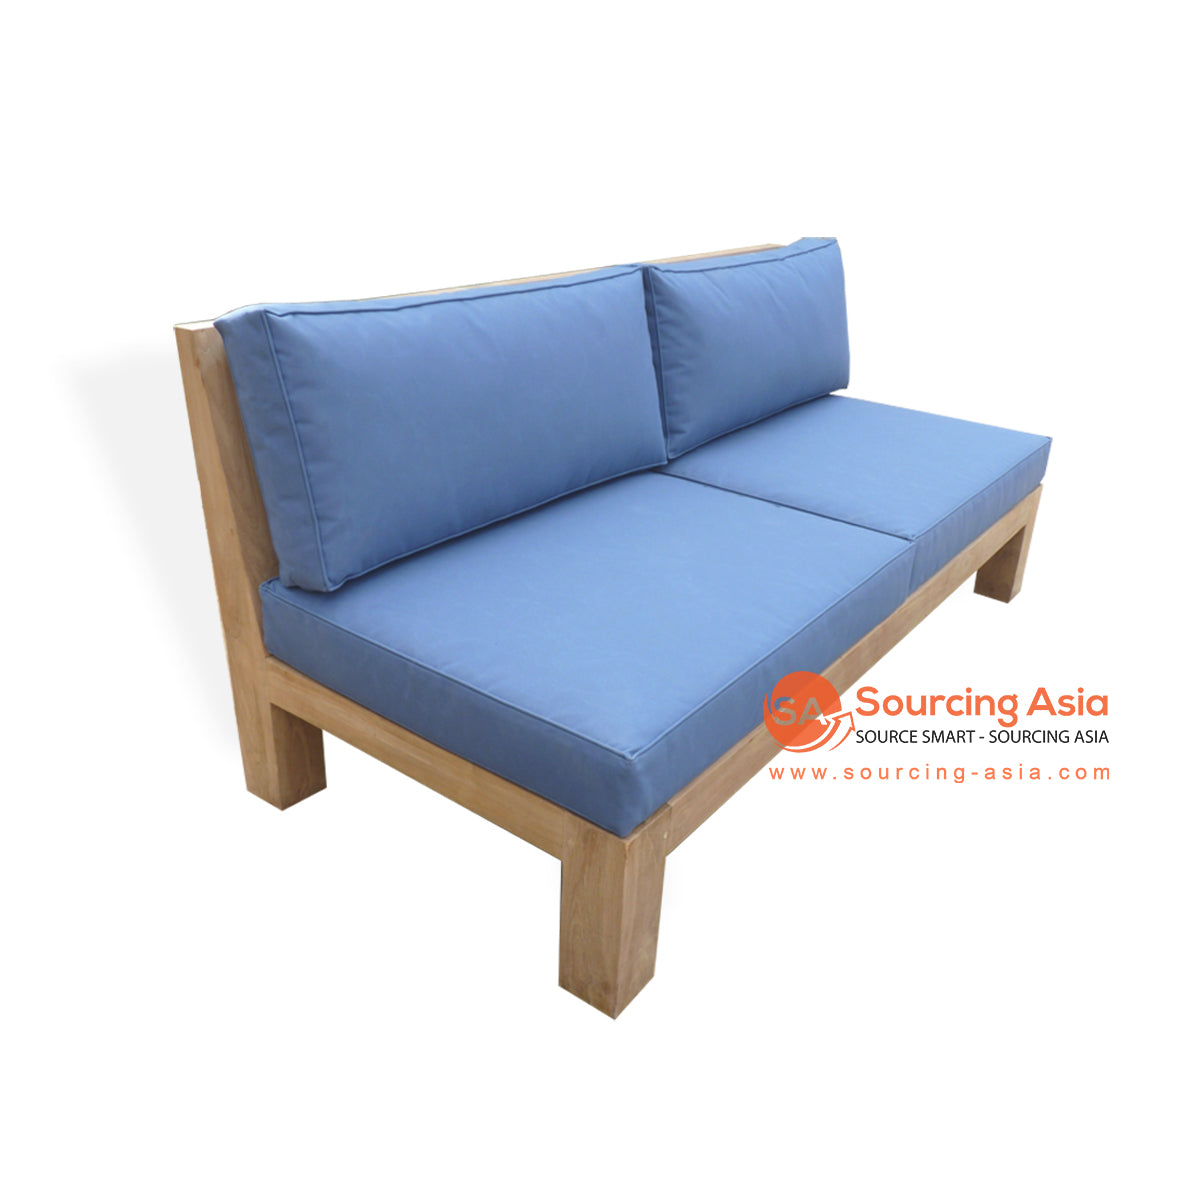 ECL048-240X75 NATURAL RECYCLED TEAK WOOD TWO SEATS SOFA (PRICE WITHOUT CUSHION)